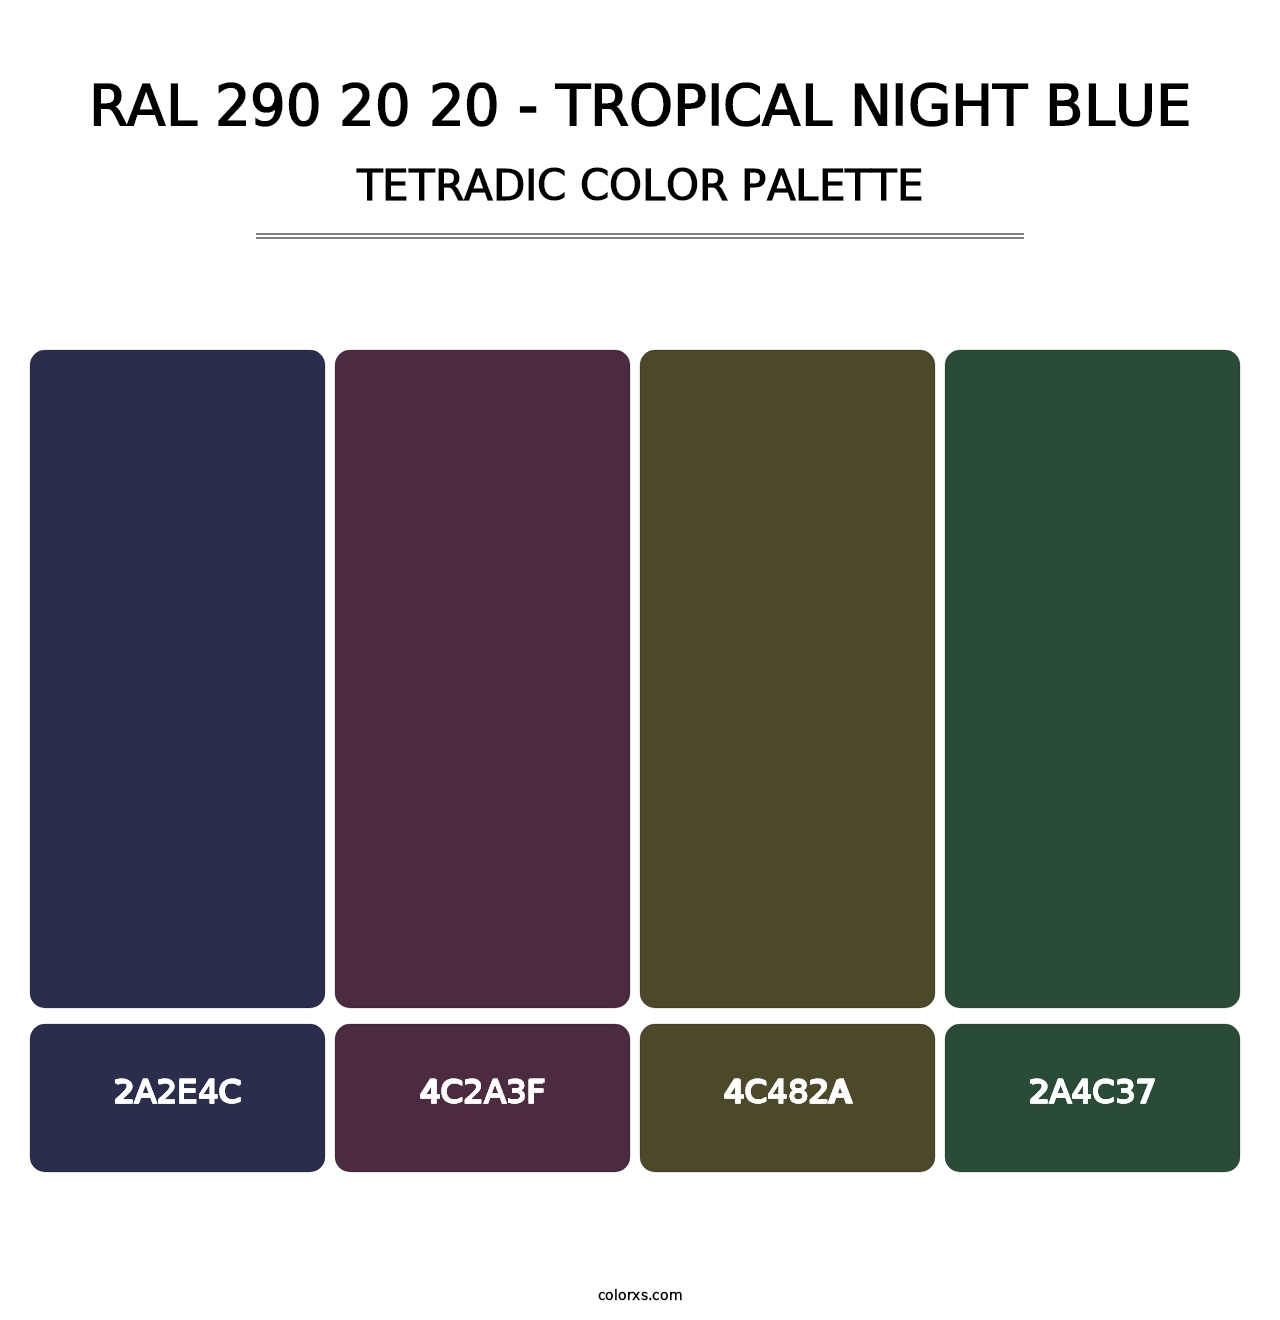 RAL 290 20 20 - Tropical Night Blue - Tetradic Color Palette